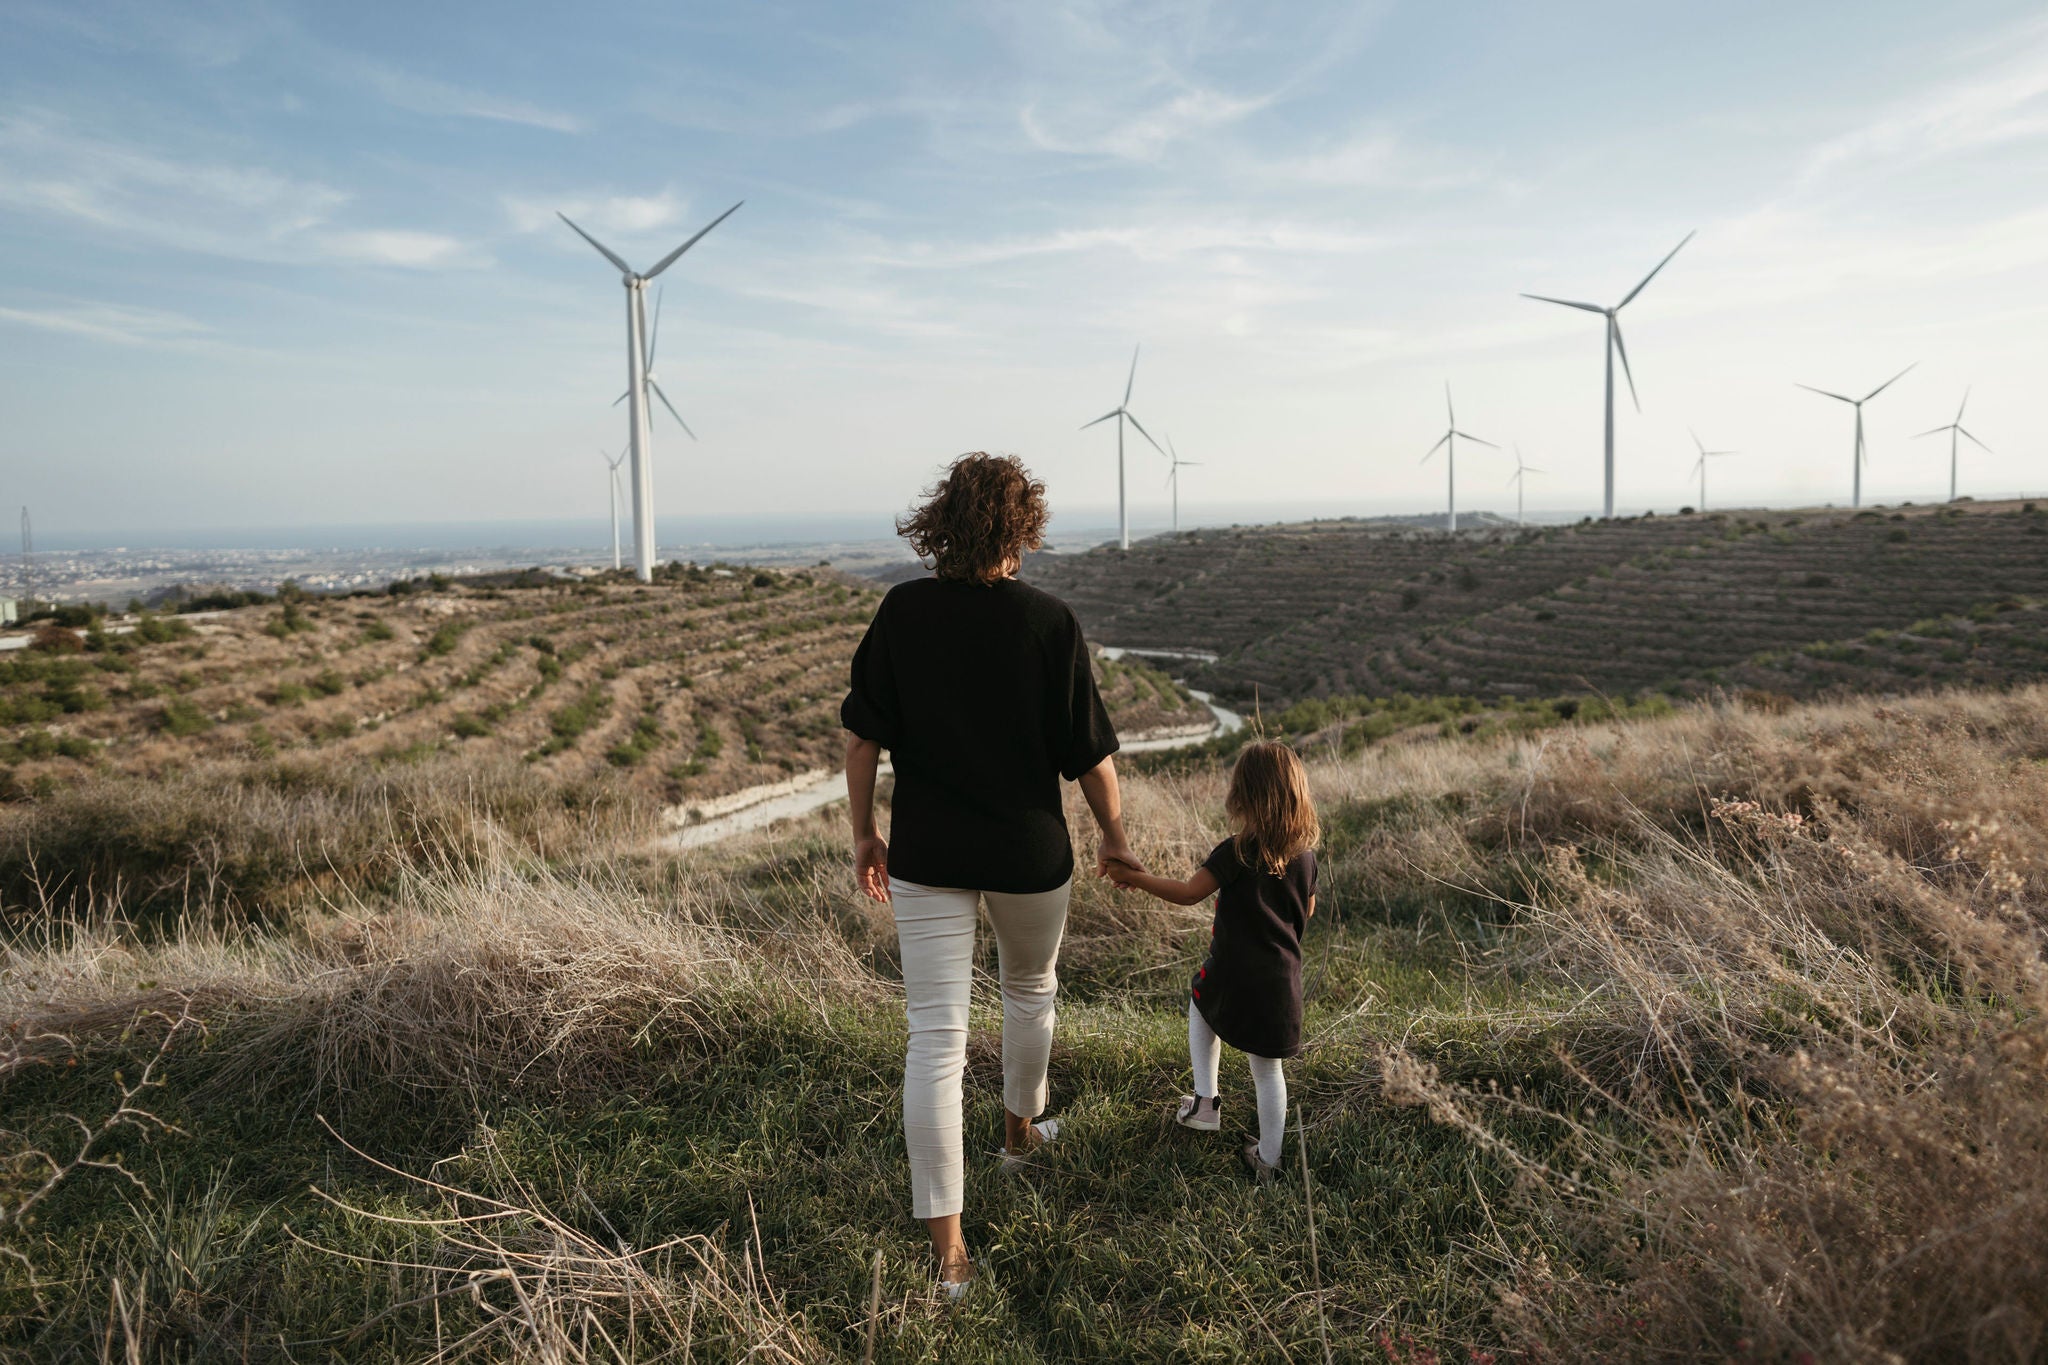 An anonymous mother with a small daughter walking in nature. Rocky landscape and windmills in the background.